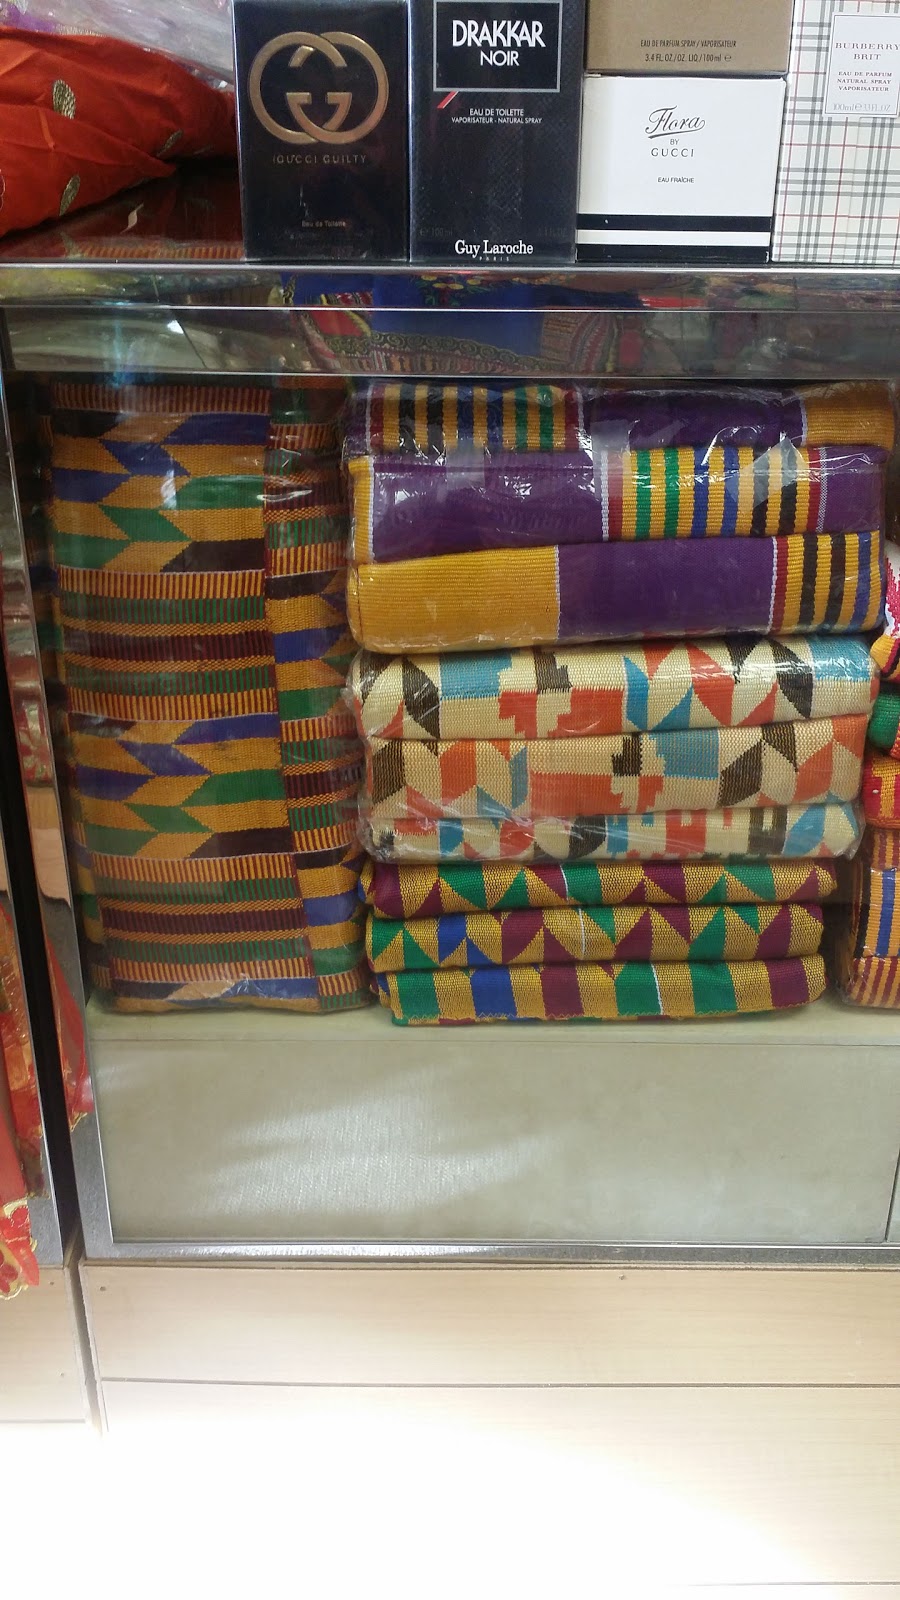 AMT African Fashion | 4415 Whitmore Ln, Fairfield, OH 45014 | Phone: (513) 307-7354